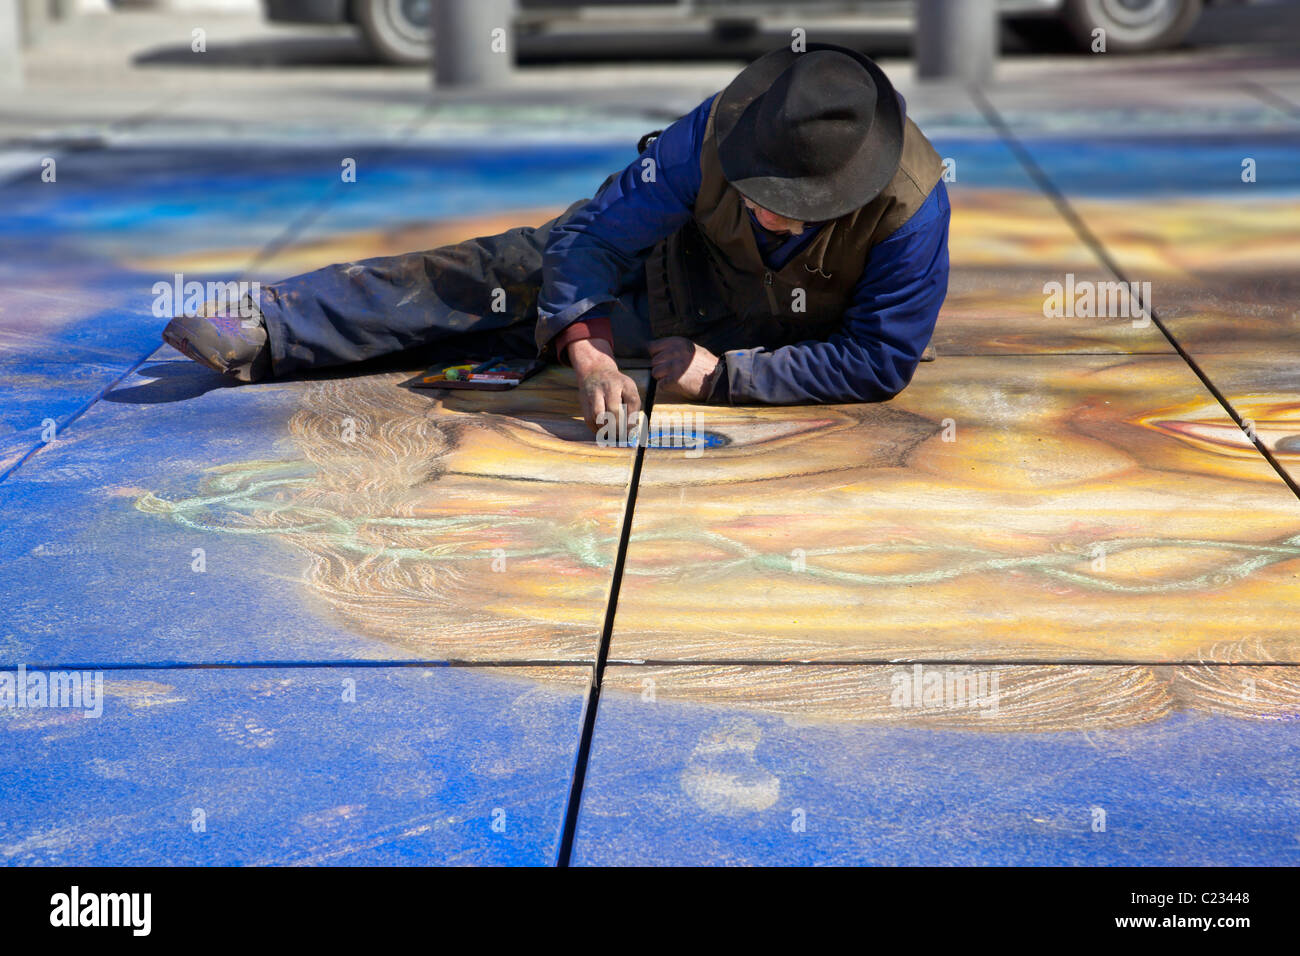 A Street artist Paris France works on a mural / painting / drawing in a park. Studio Lupica Stock Photo